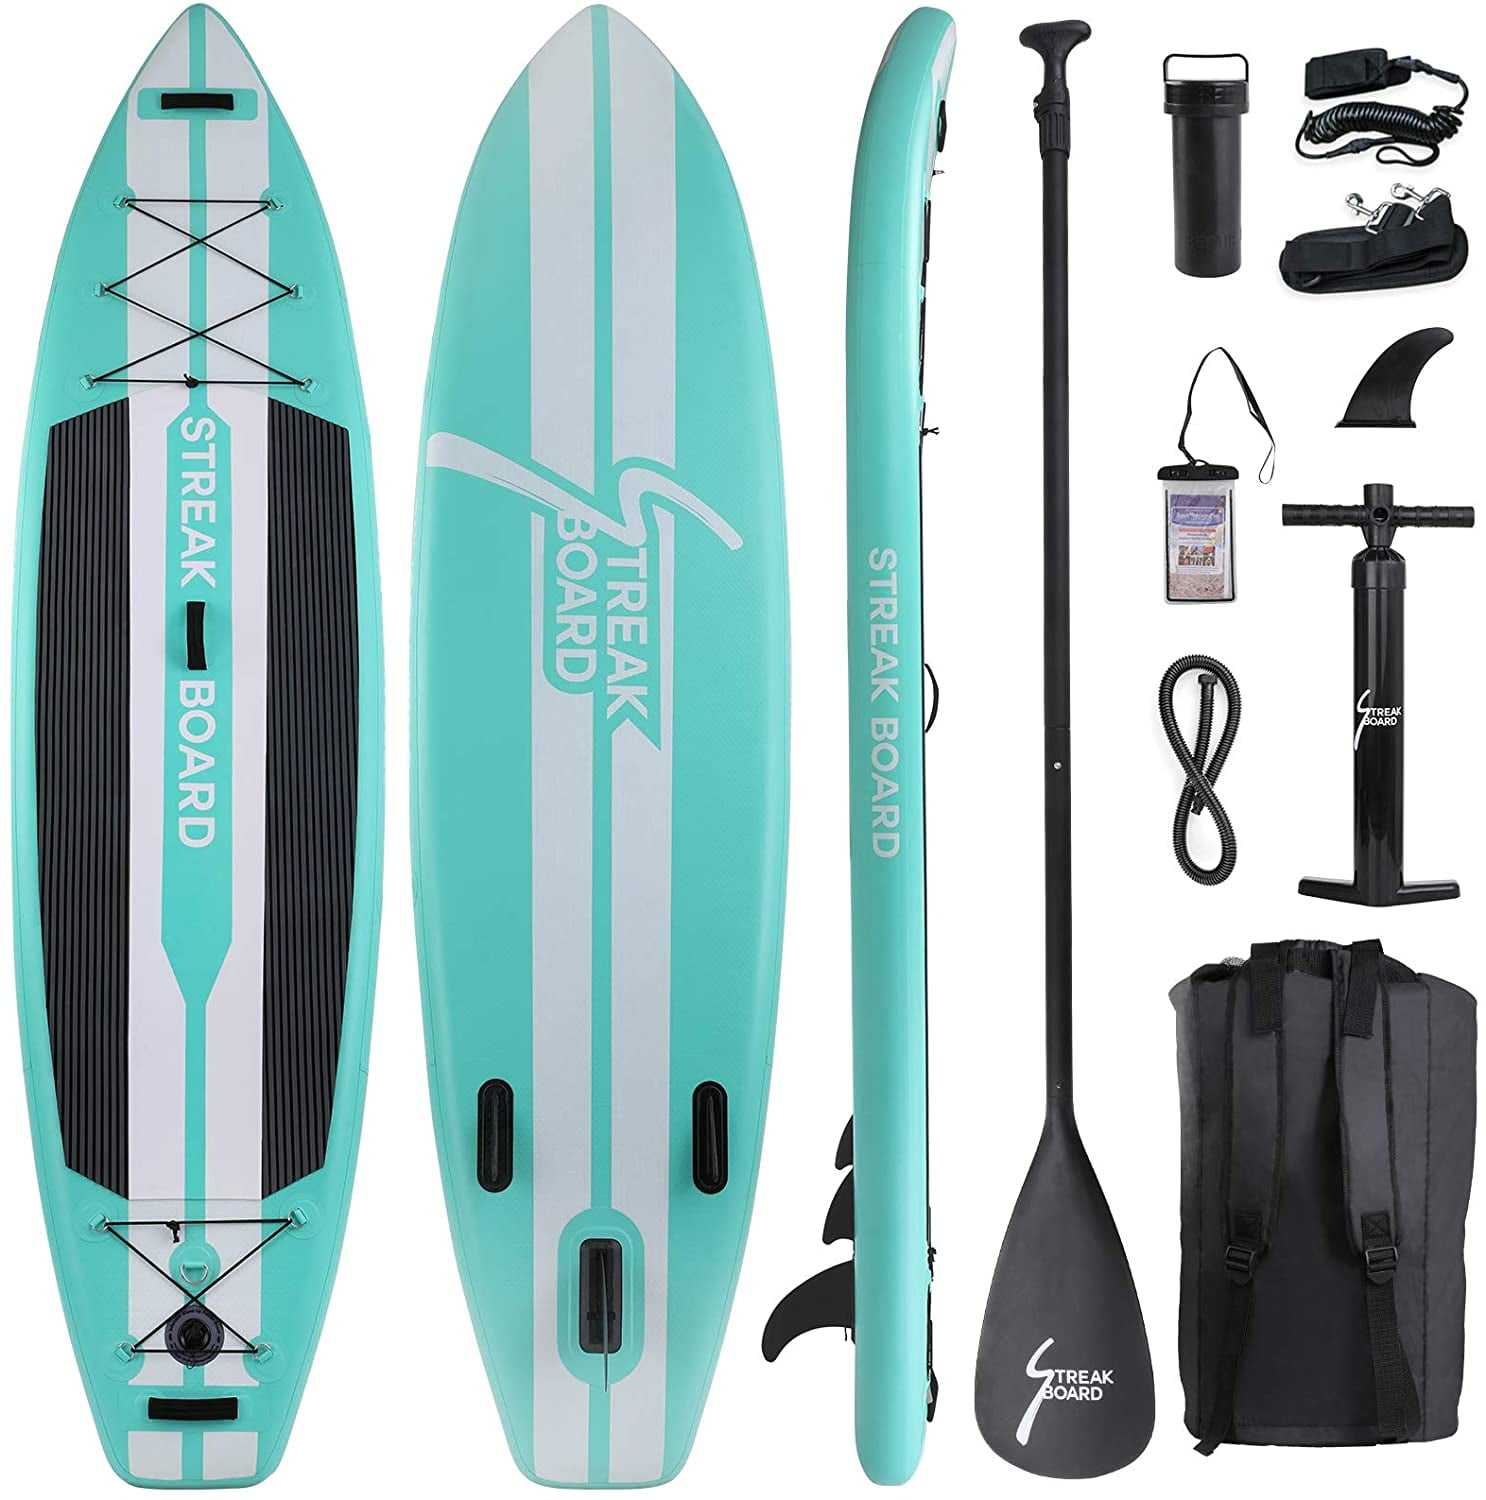 HEMBOR 11' Inflatable Stand Up Paddle Board SUP Board with Backpack ...